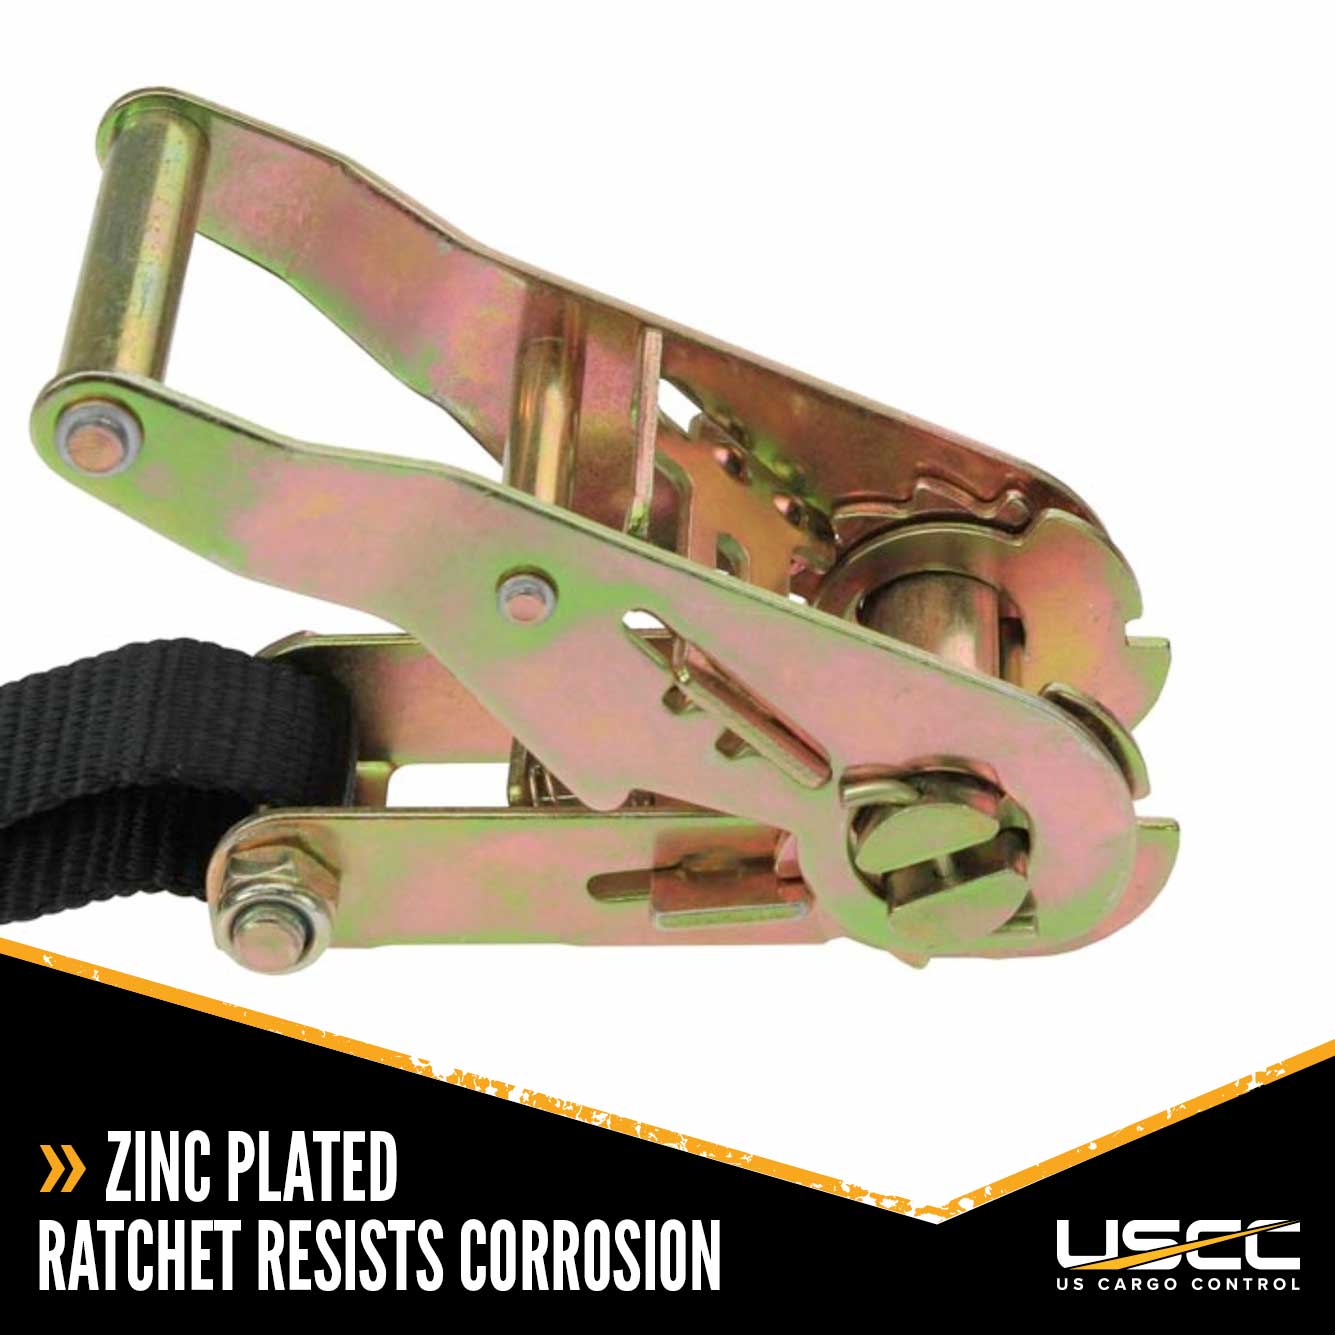 1 inch x 6 foot Ratchet Strap with Shooks Motorcycle Tie Down Straps image 2 of 9